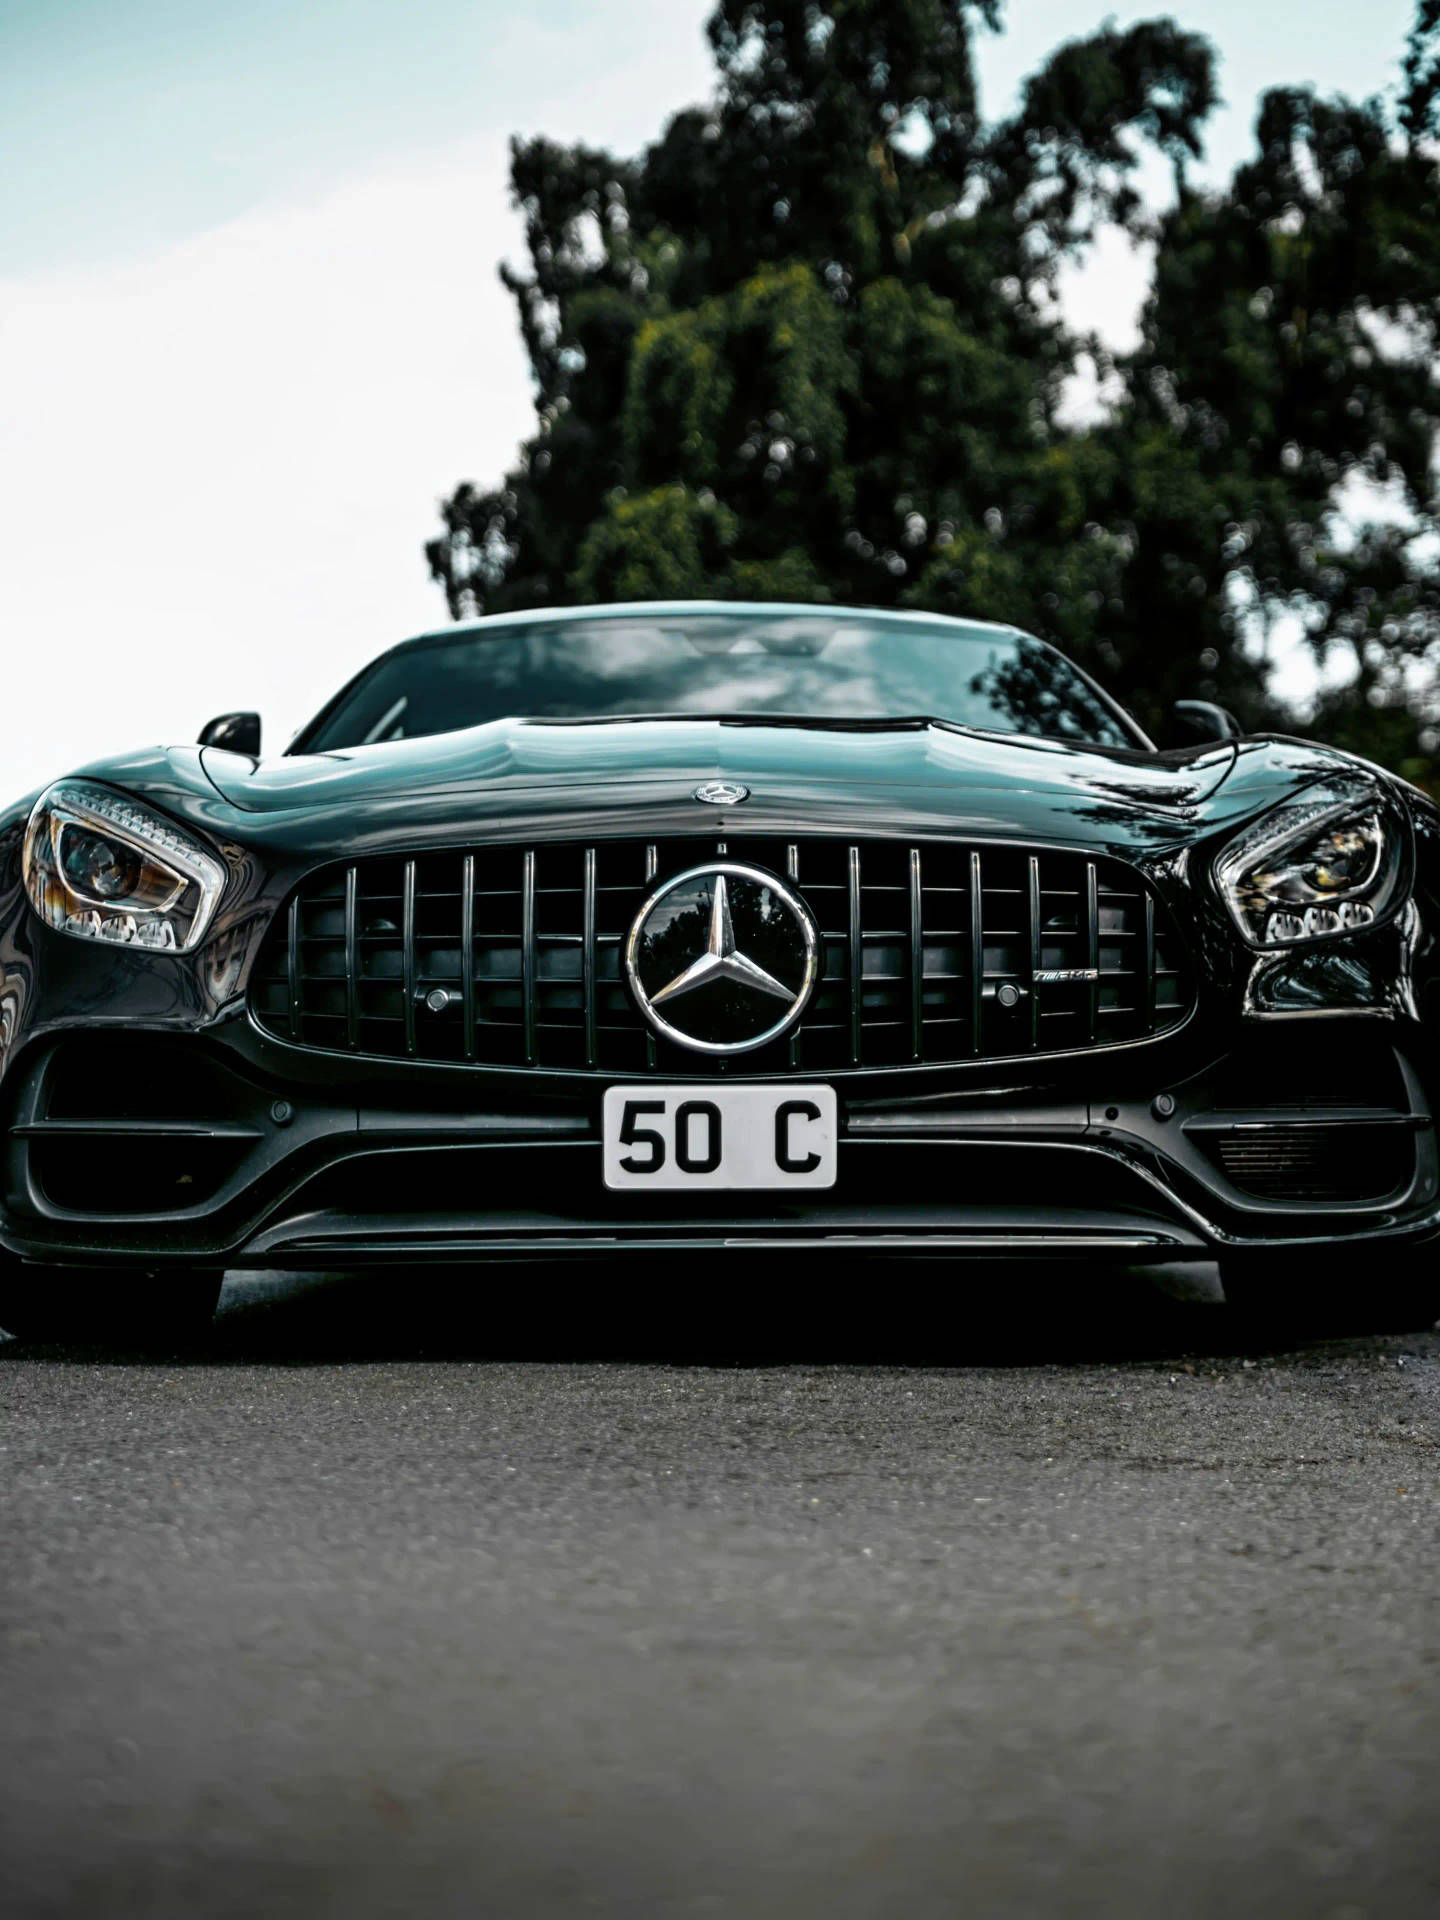 Front View of a Gleaming AMG Vehicle Wallpaper